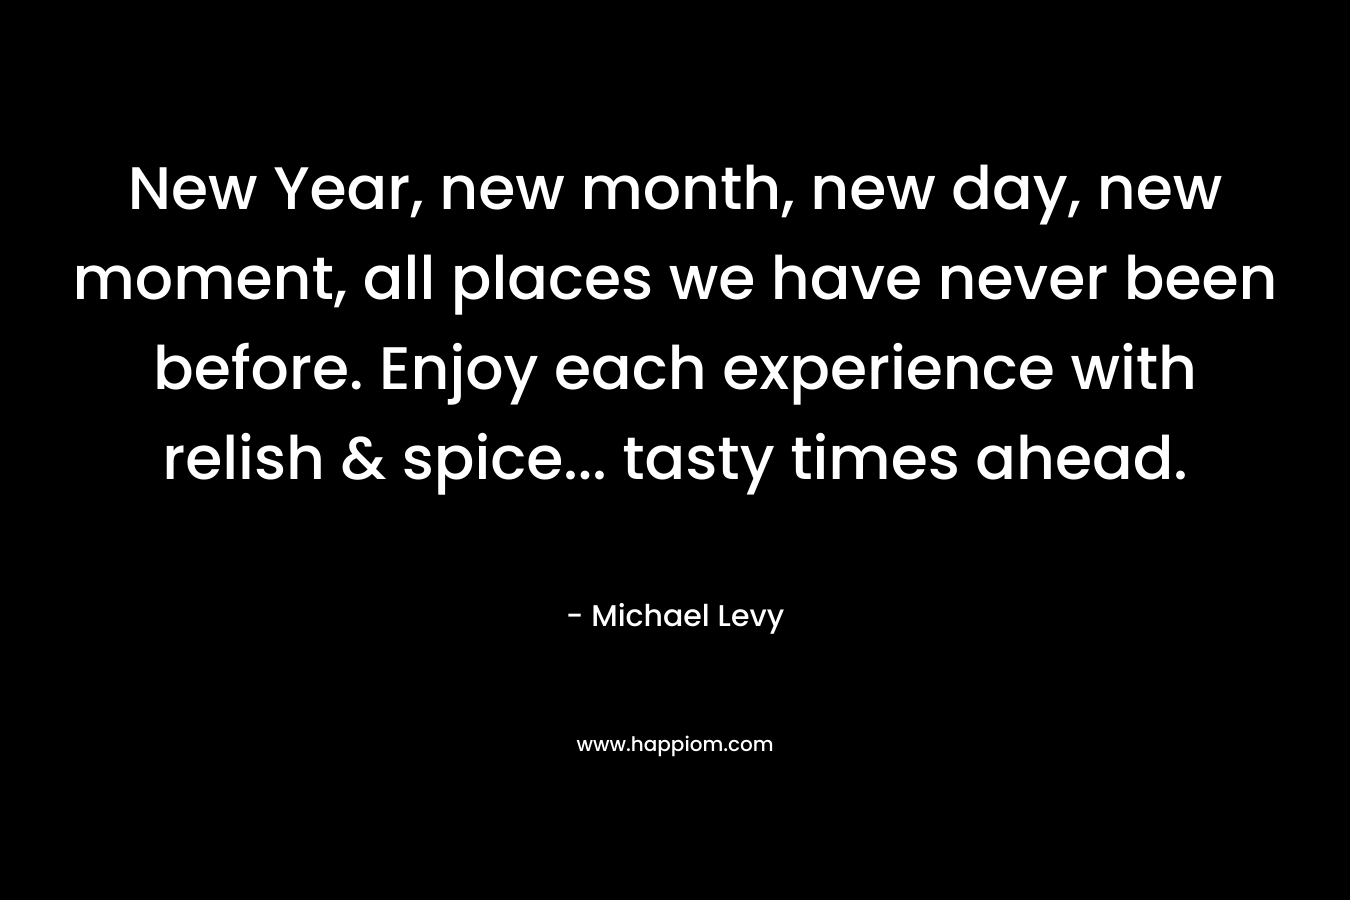 New Year, new month, new day, new moment, all places we have never been before. Enjoy each experience with relish & spice… tasty times ahead. – Michael Levy